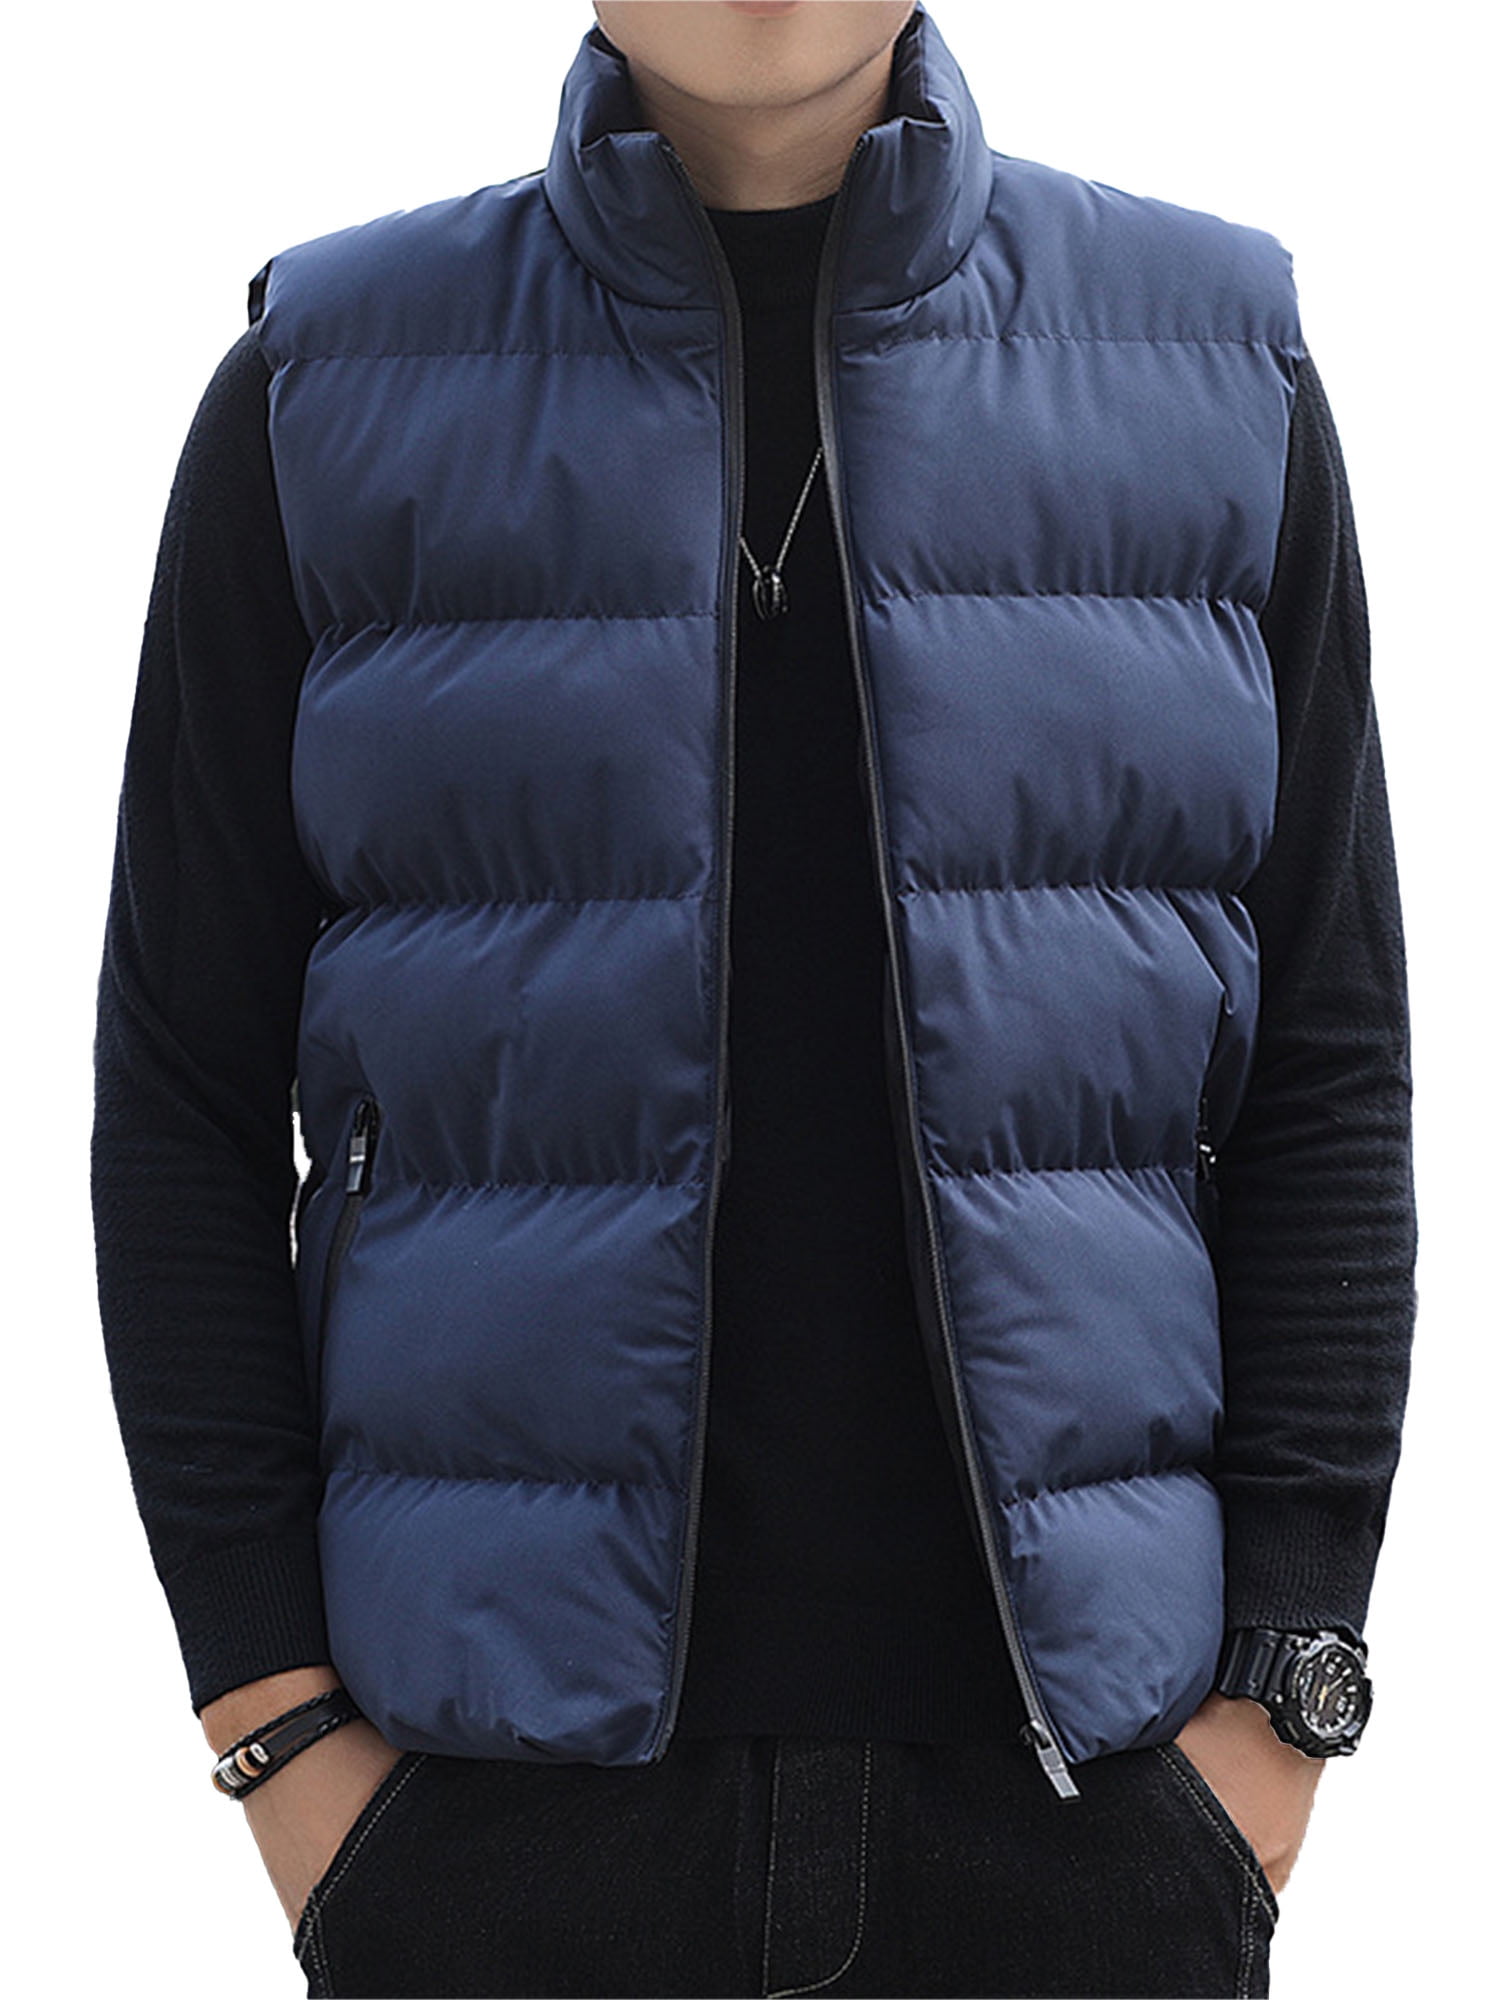 Mens Gilets Quilted Body Warmer Hooded Sleeveless Jacket Outdoor Waistcoats with Pockets 